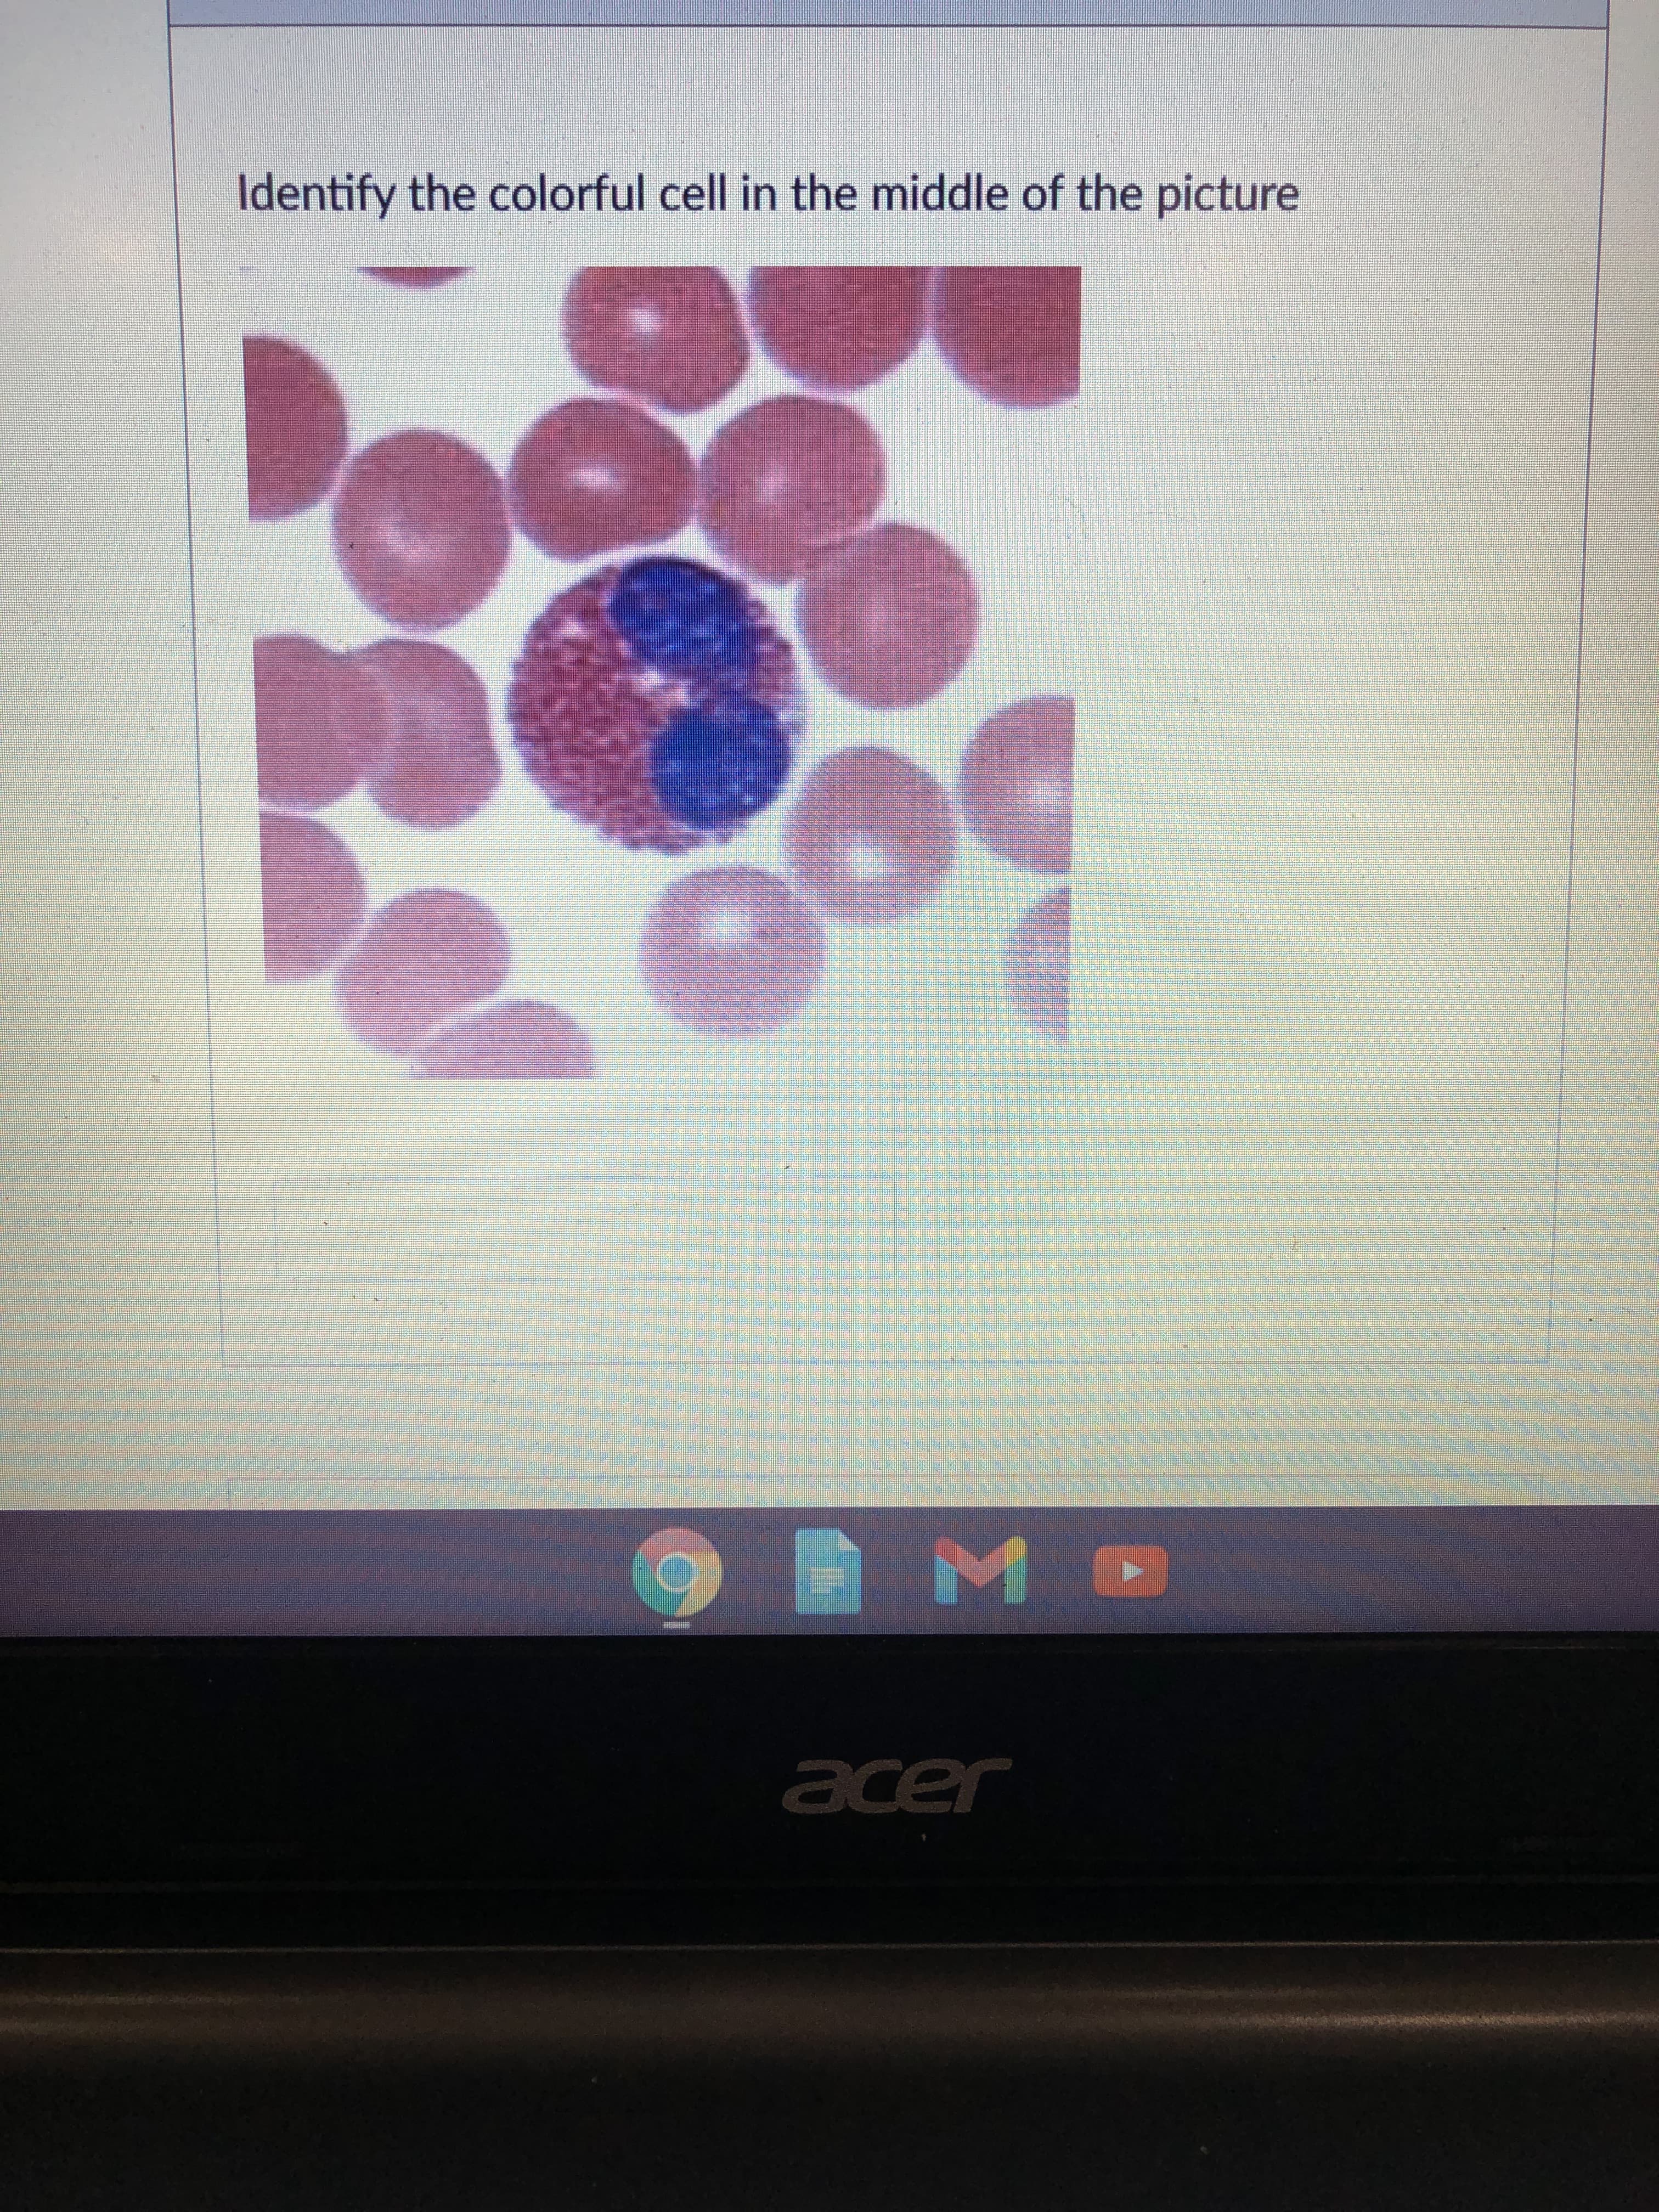 Identify the colorful cell in the middle of the picture
